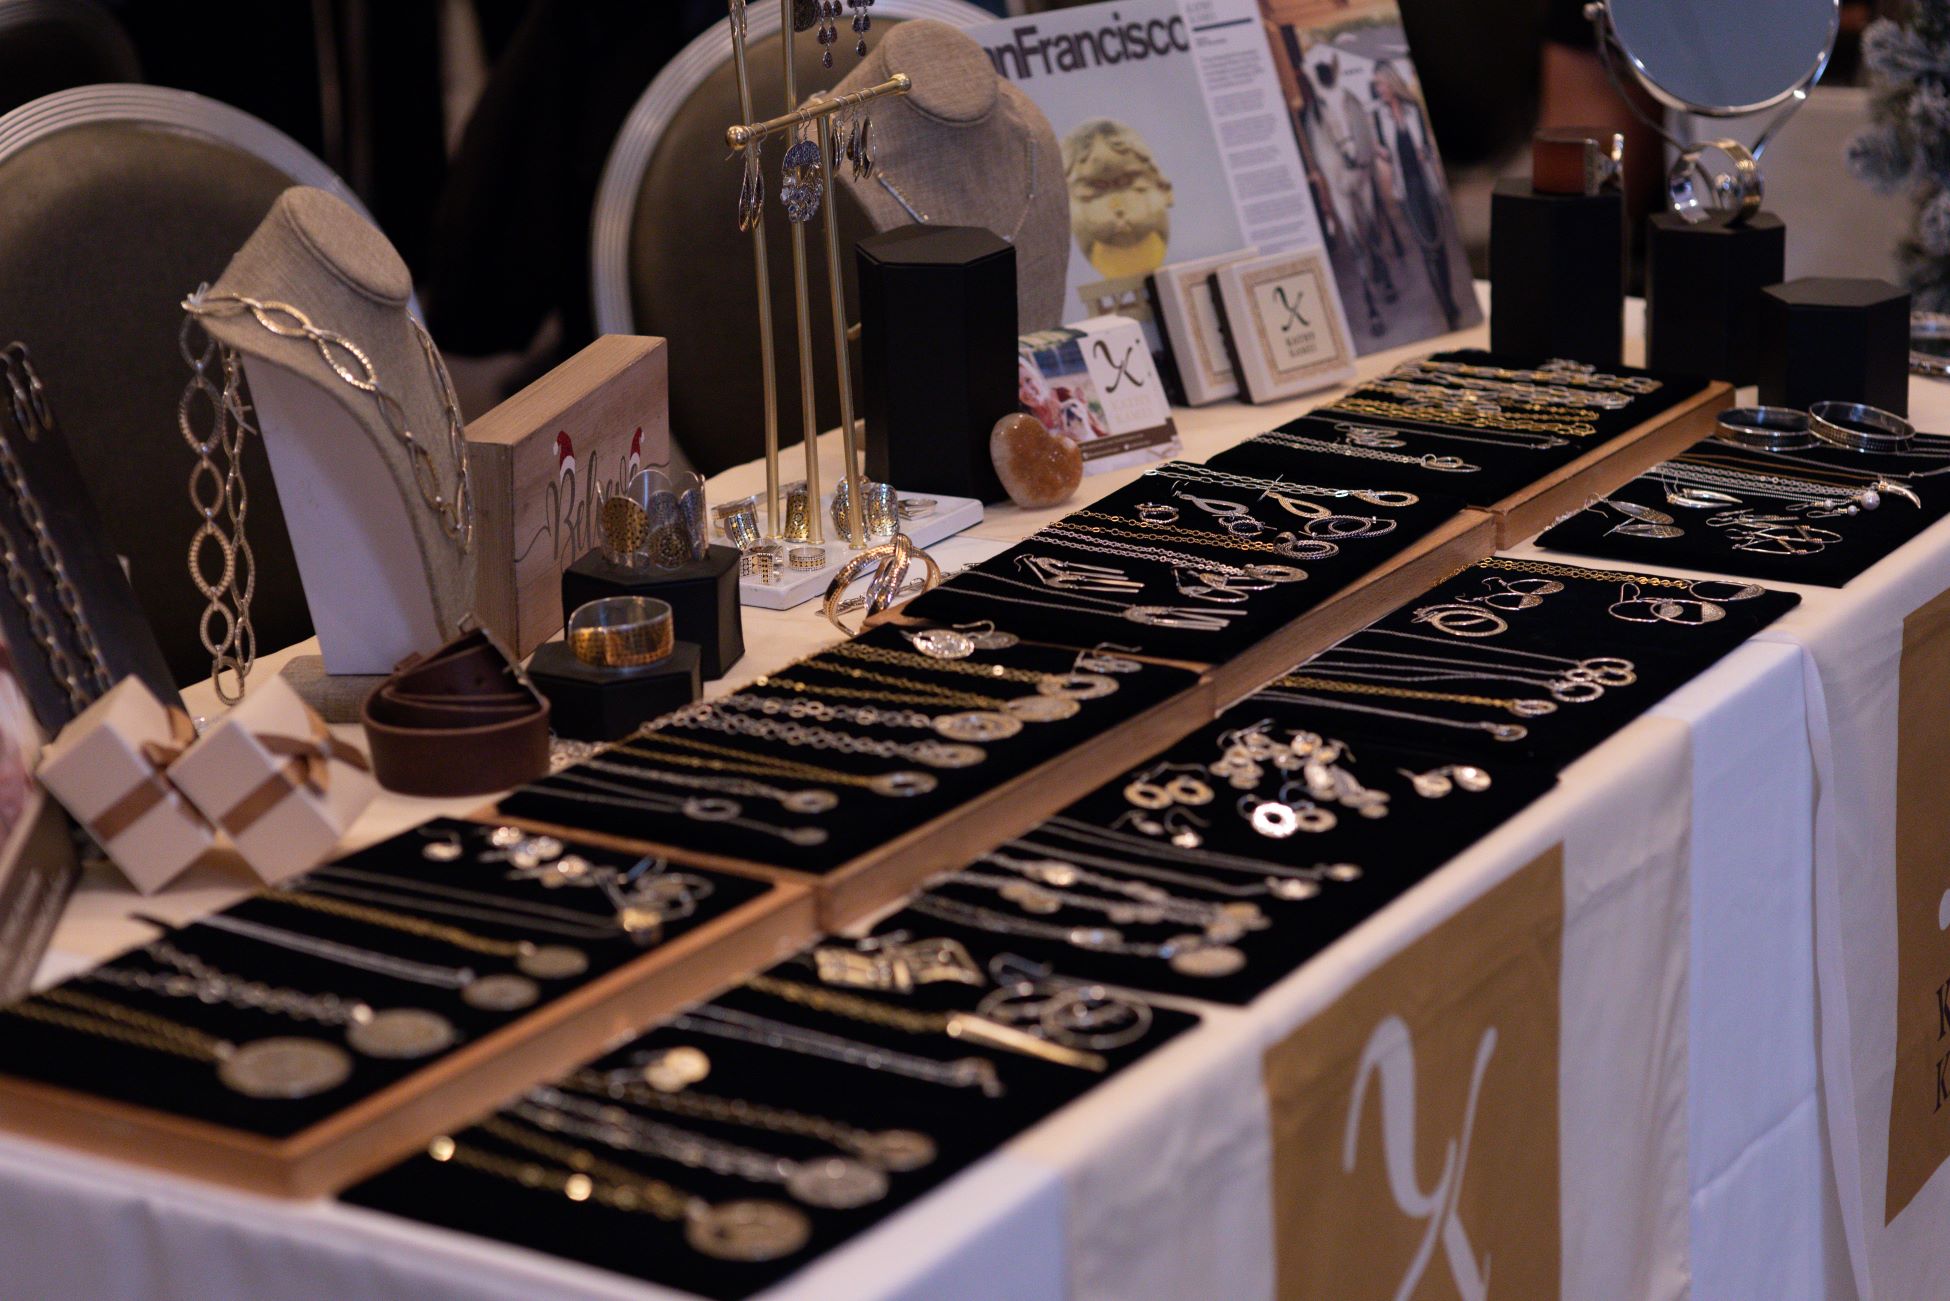 An image of a jewelry vendor at the SLS shopping event.